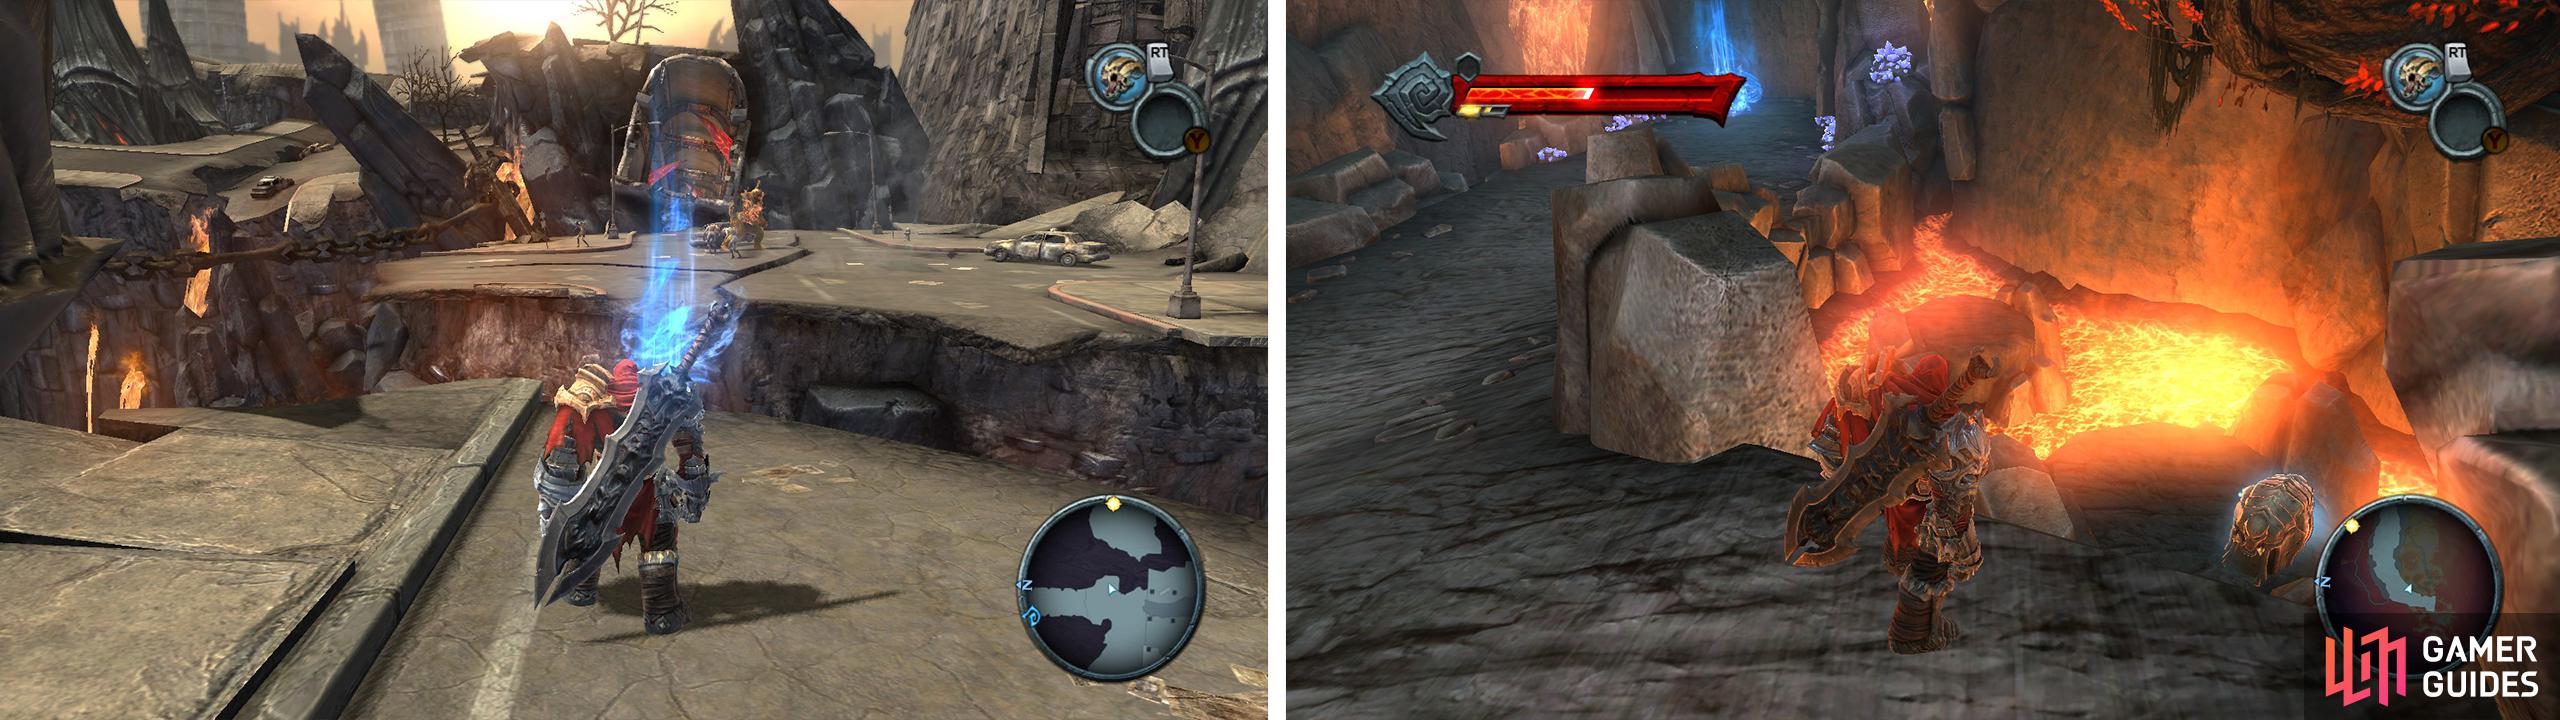 Use shadowflight to cross the gaps here (right). Once in the cave, look down to the right for a Blue Soul Chest (right).